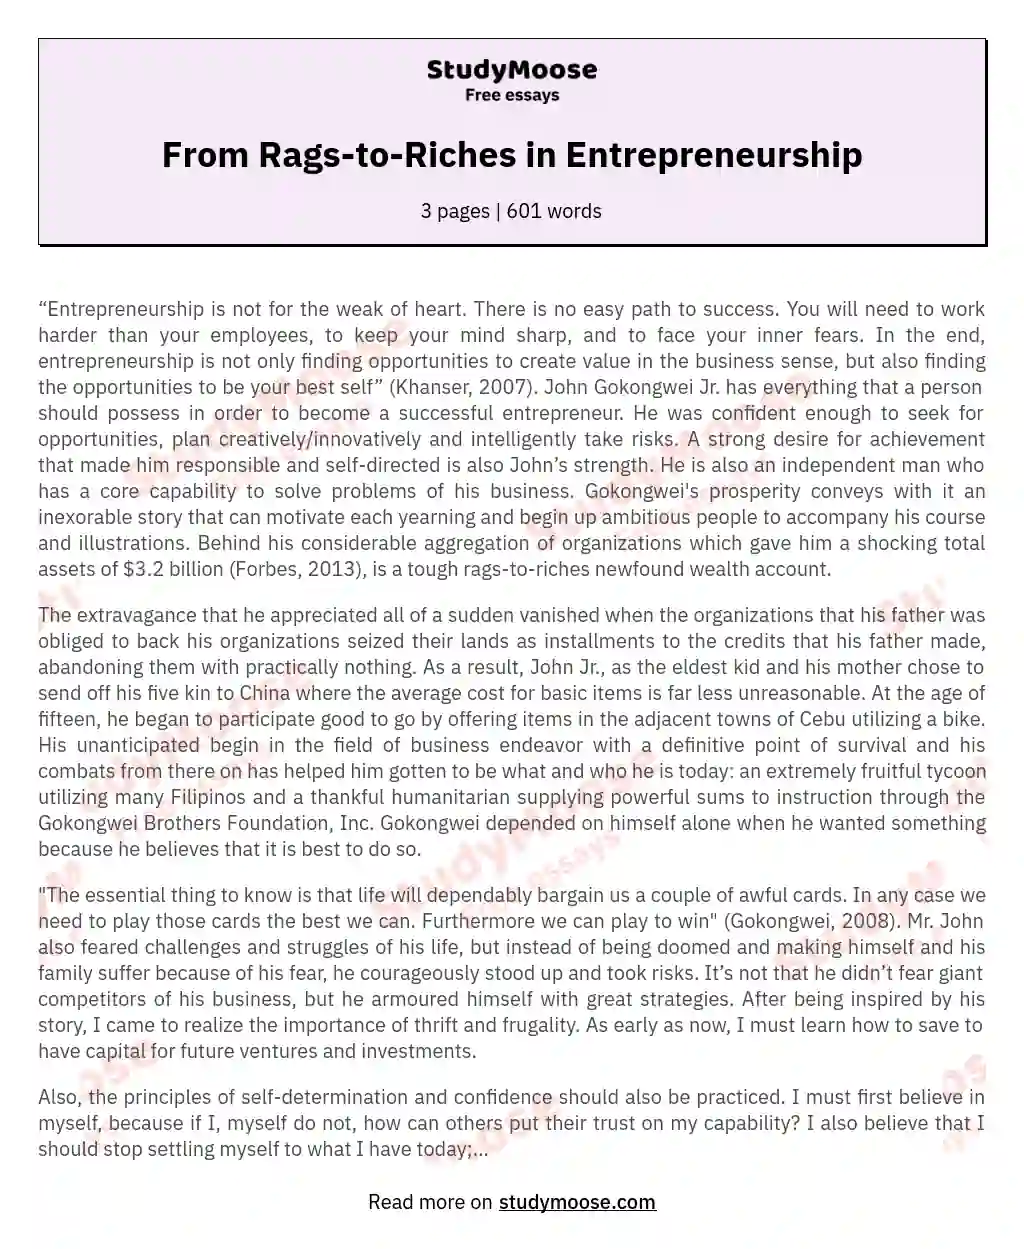 From Rags-to-Riches in Entrepreneurship essay